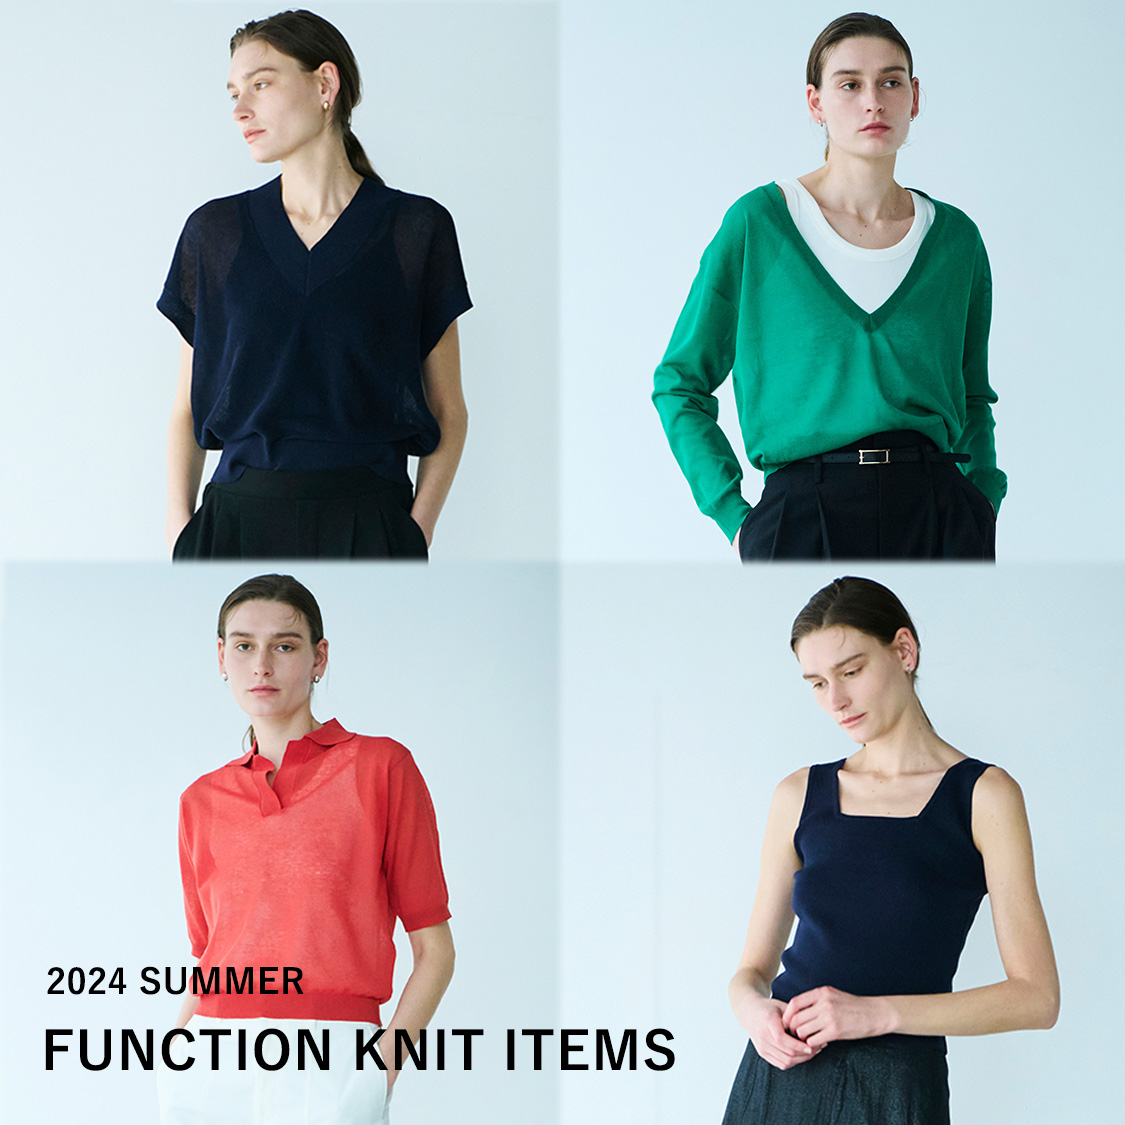 FUNCTION KNIT ITEMS